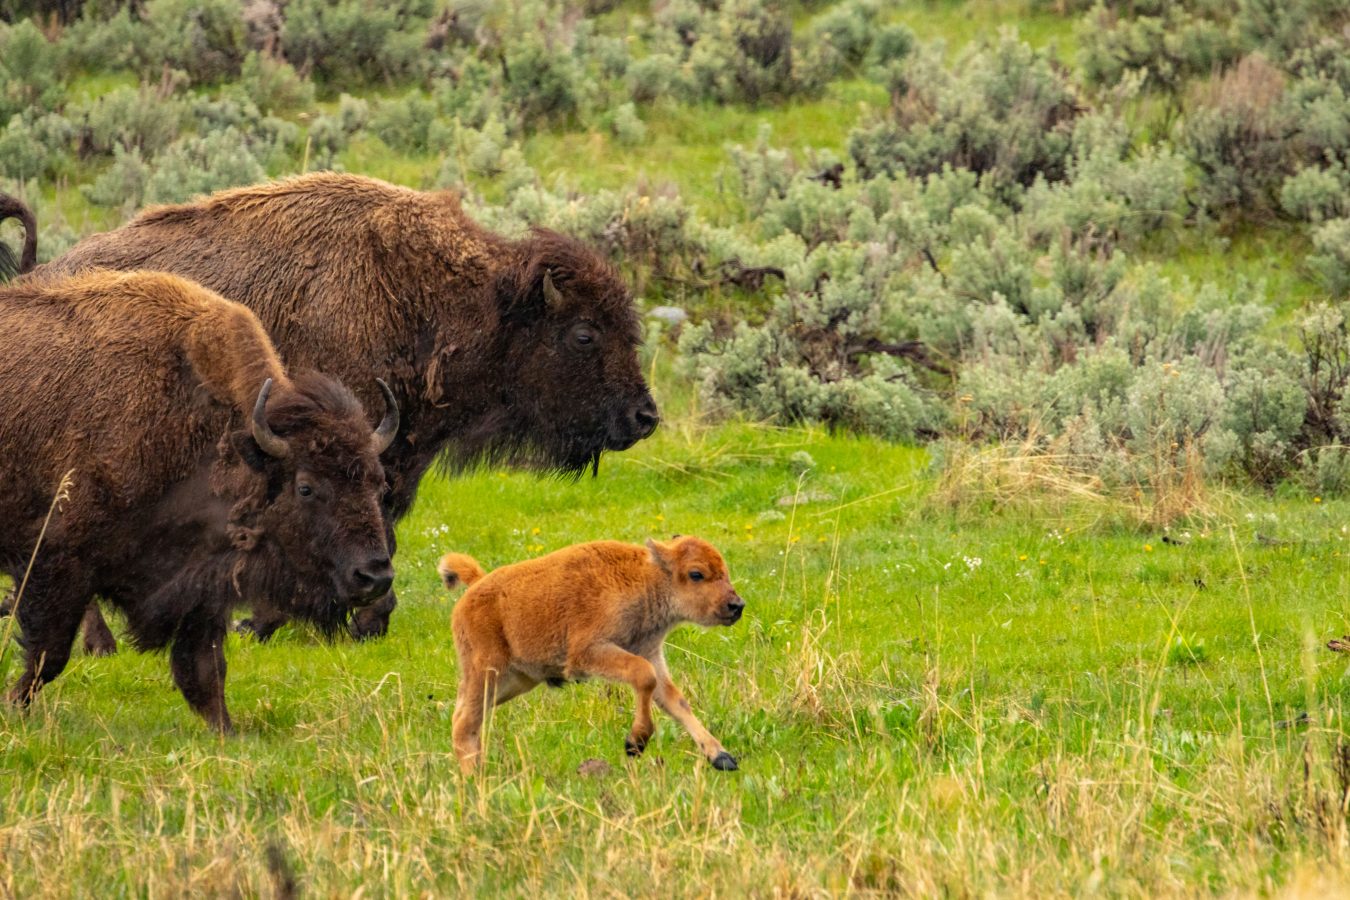 A bison calf and two adults in Lamar Valley in Yellowstone National Park.